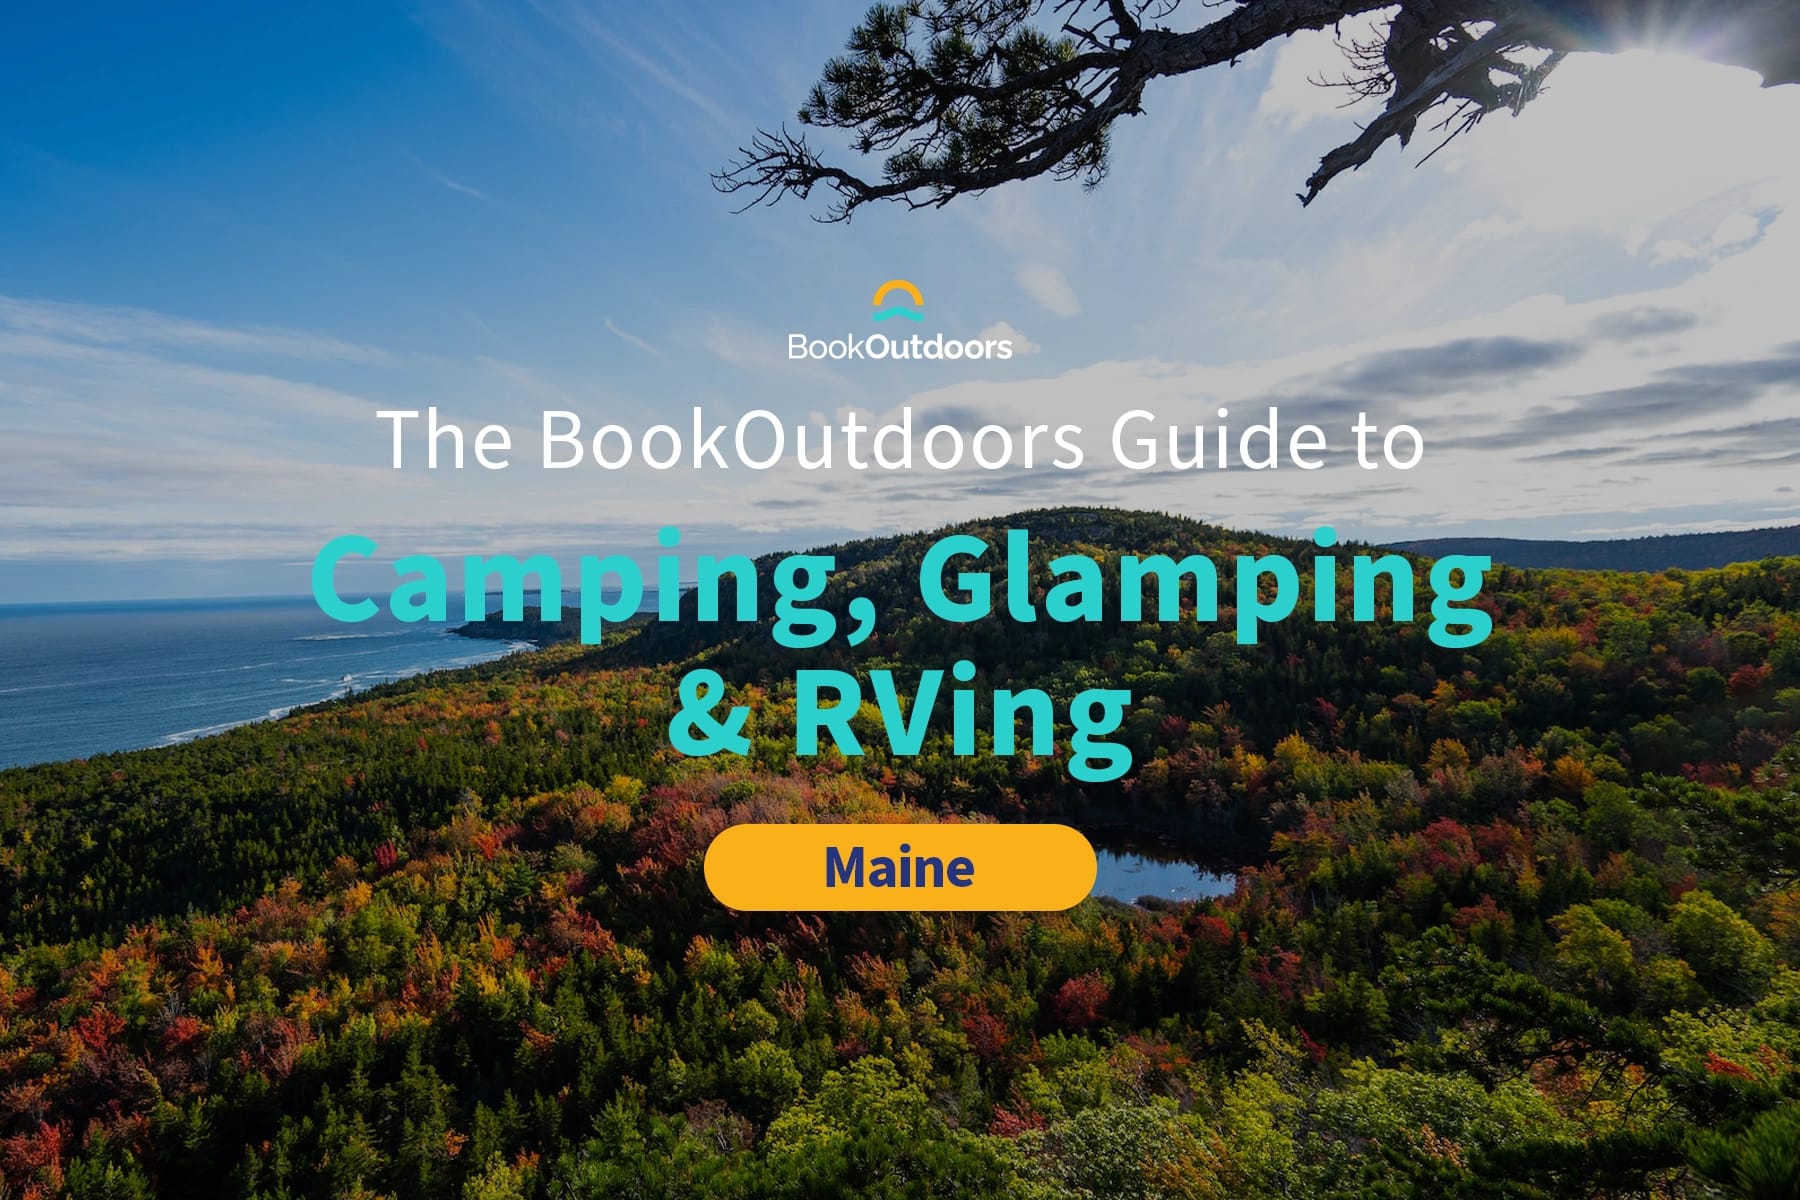 Image of Maine wilderness to convey camping in Maine - BookOutdoors